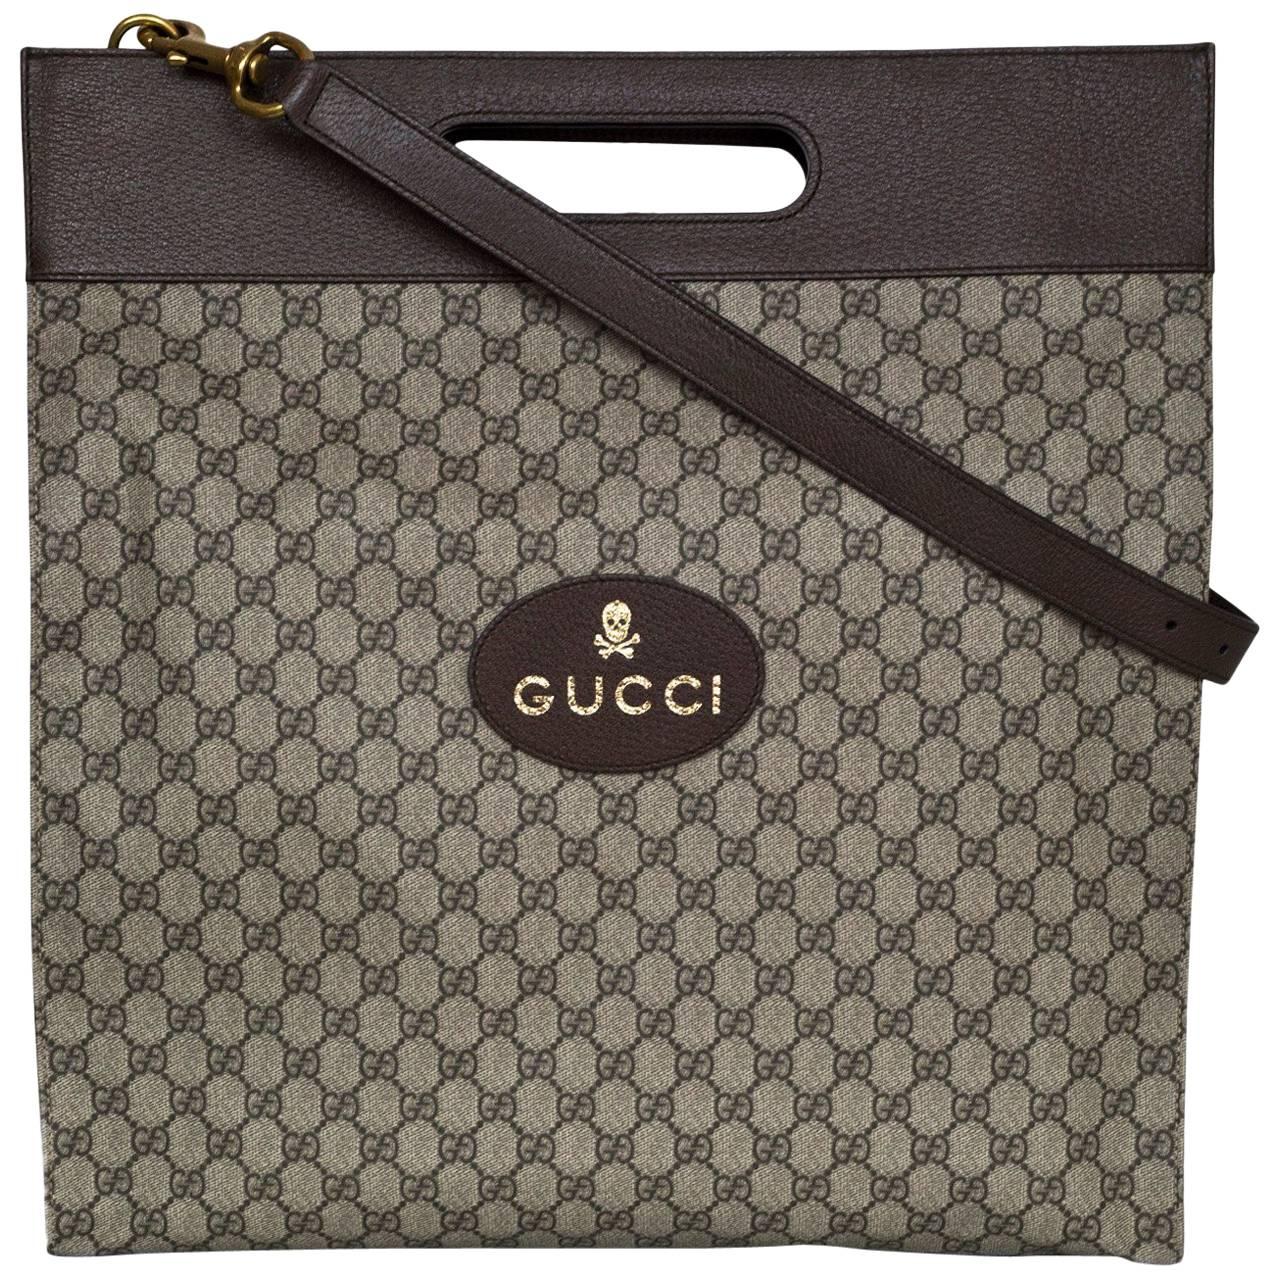 Gucci Soft GG Supreme XL Tote Bag with Dust Bag and Shopping Bag, Spring 2017 